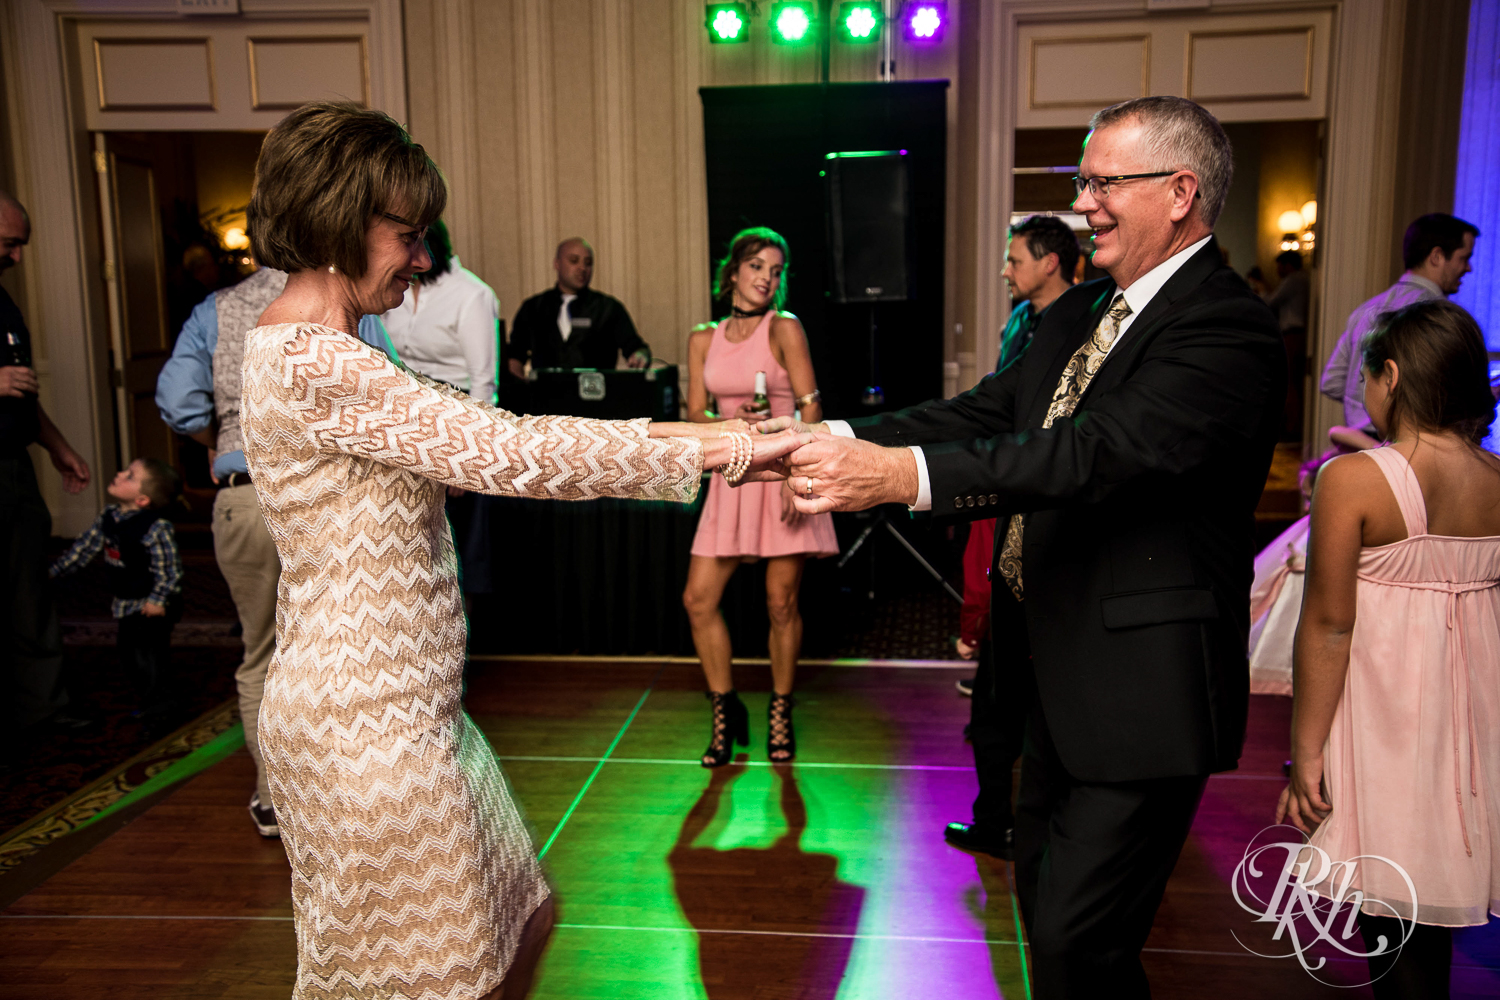 Guests dance at wedding reception at The Saint Paul Hotel in Saint Paul, Minnesota.